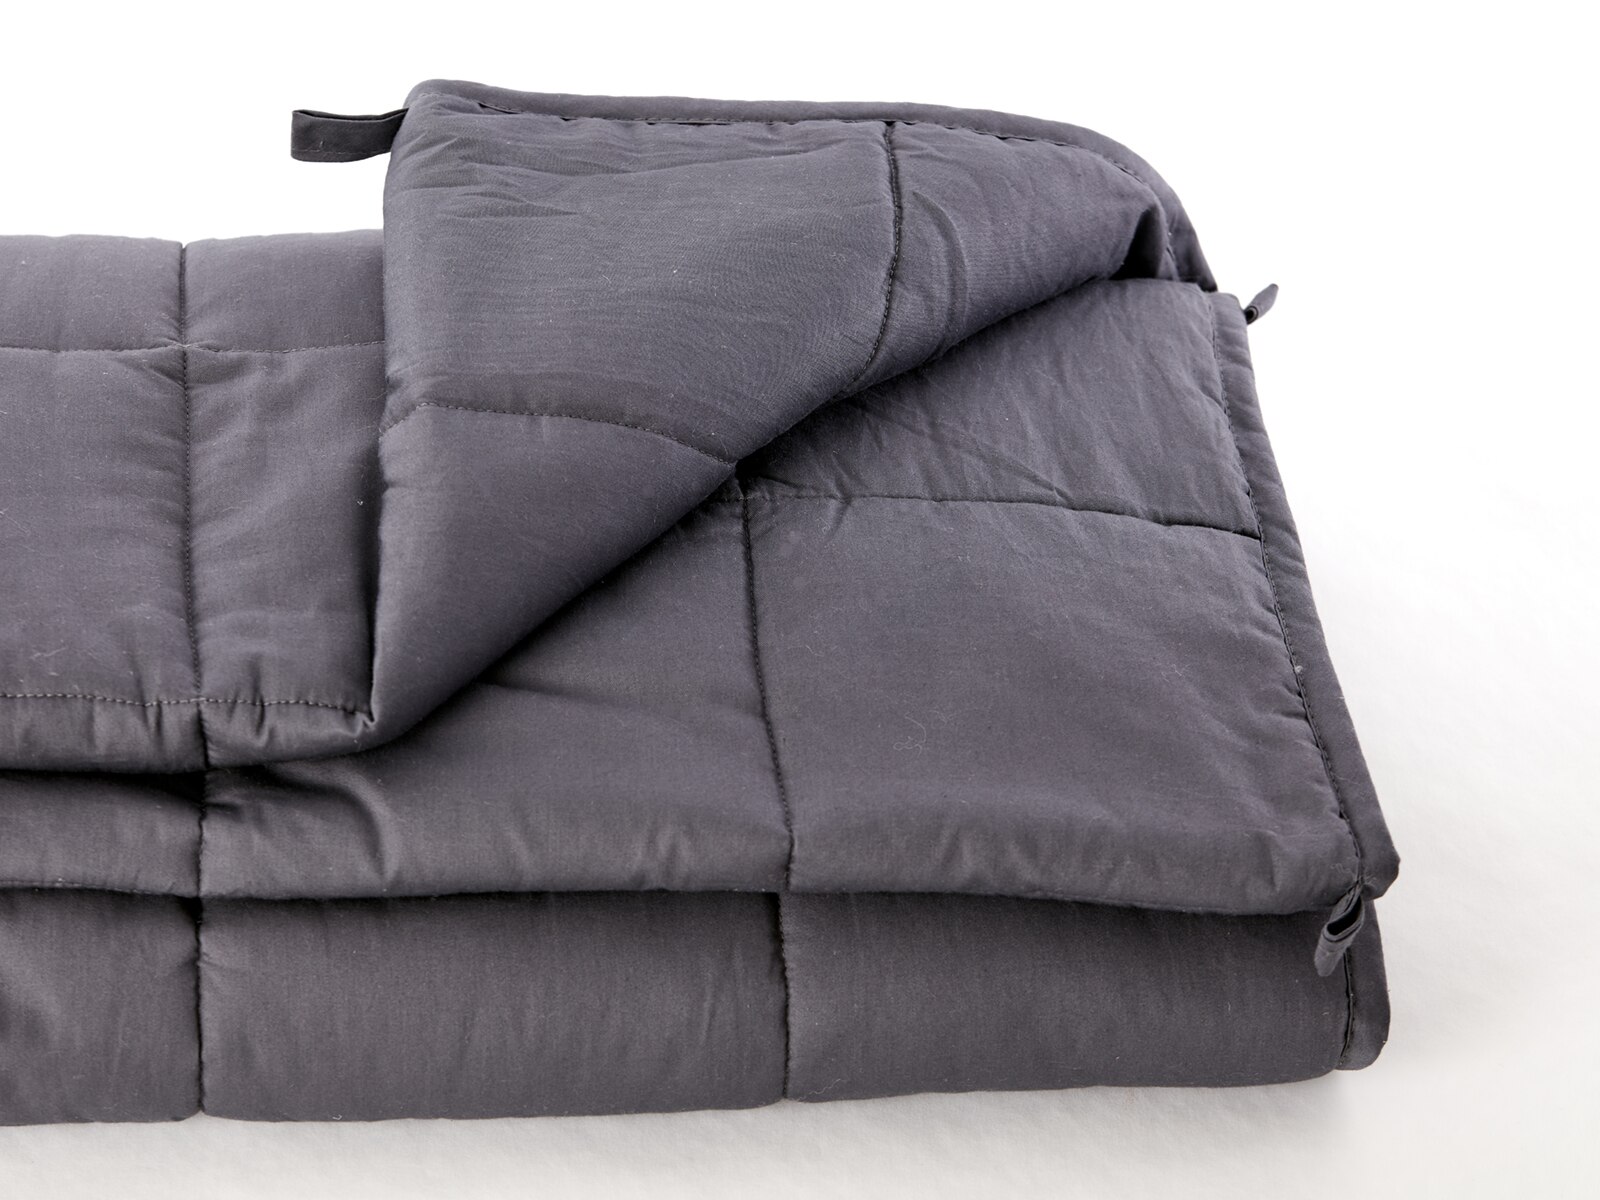 Proper 20 lb Weighted Blanket